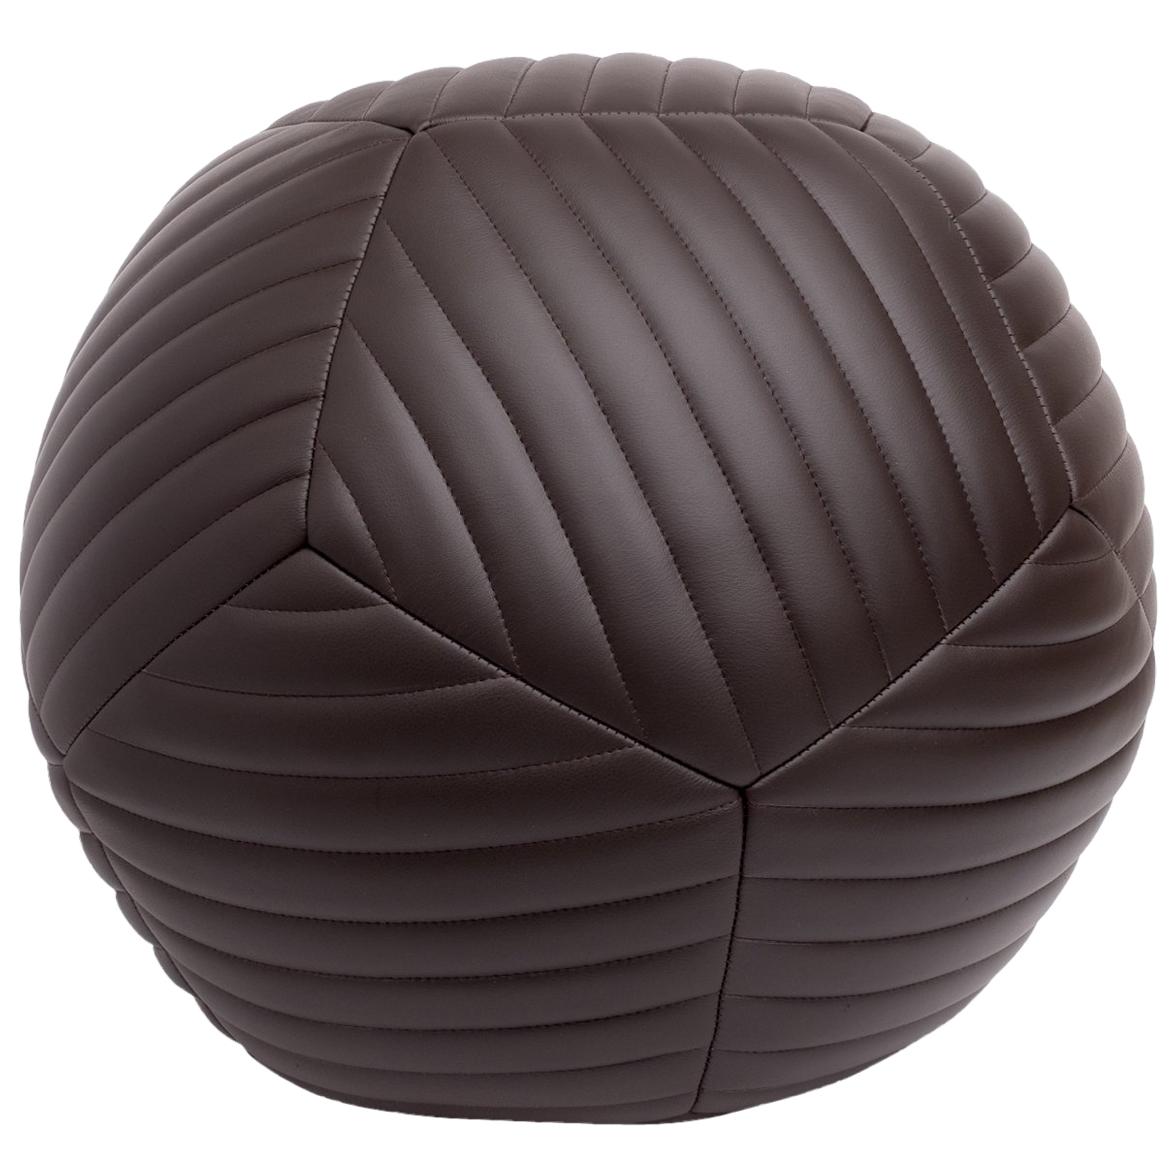 Banded Ottoman 18" in Chocolate Brown Leather by Moses Nadel For Sale